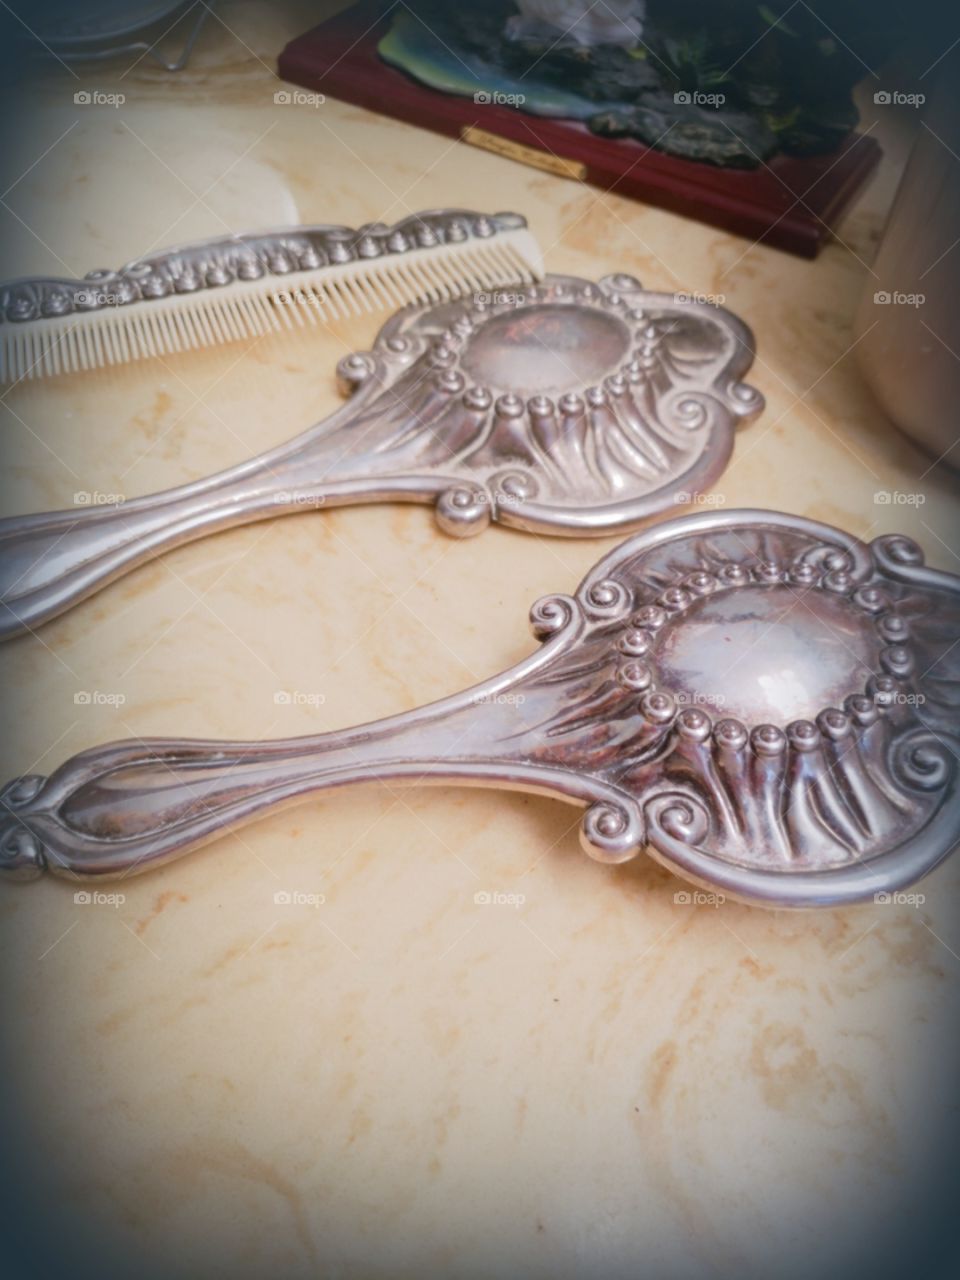 A beautiful silver antique set my grandmother owns. A soft bristle brush, comb and mirror.